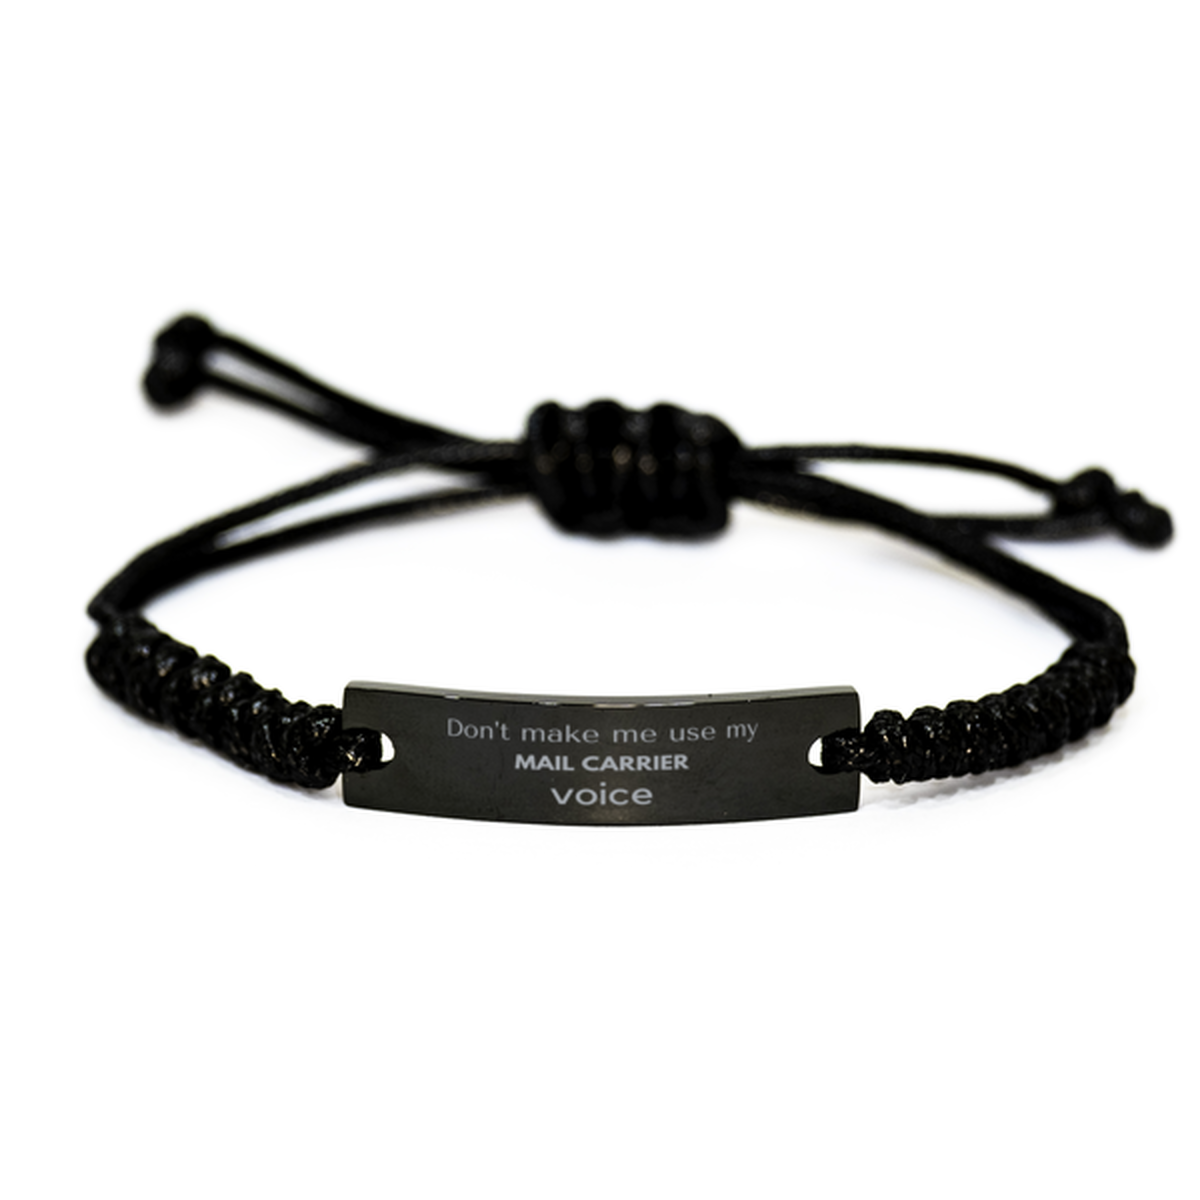 Don't make me use my Mail Carrier voice, Sarcasm Mail Carrier Gifts, Christmas Mail Carrier Black Rope Bracelet Birthday Unique Gifts For Mail Carrier Coworkers, Men, Women, Colleague, Friends